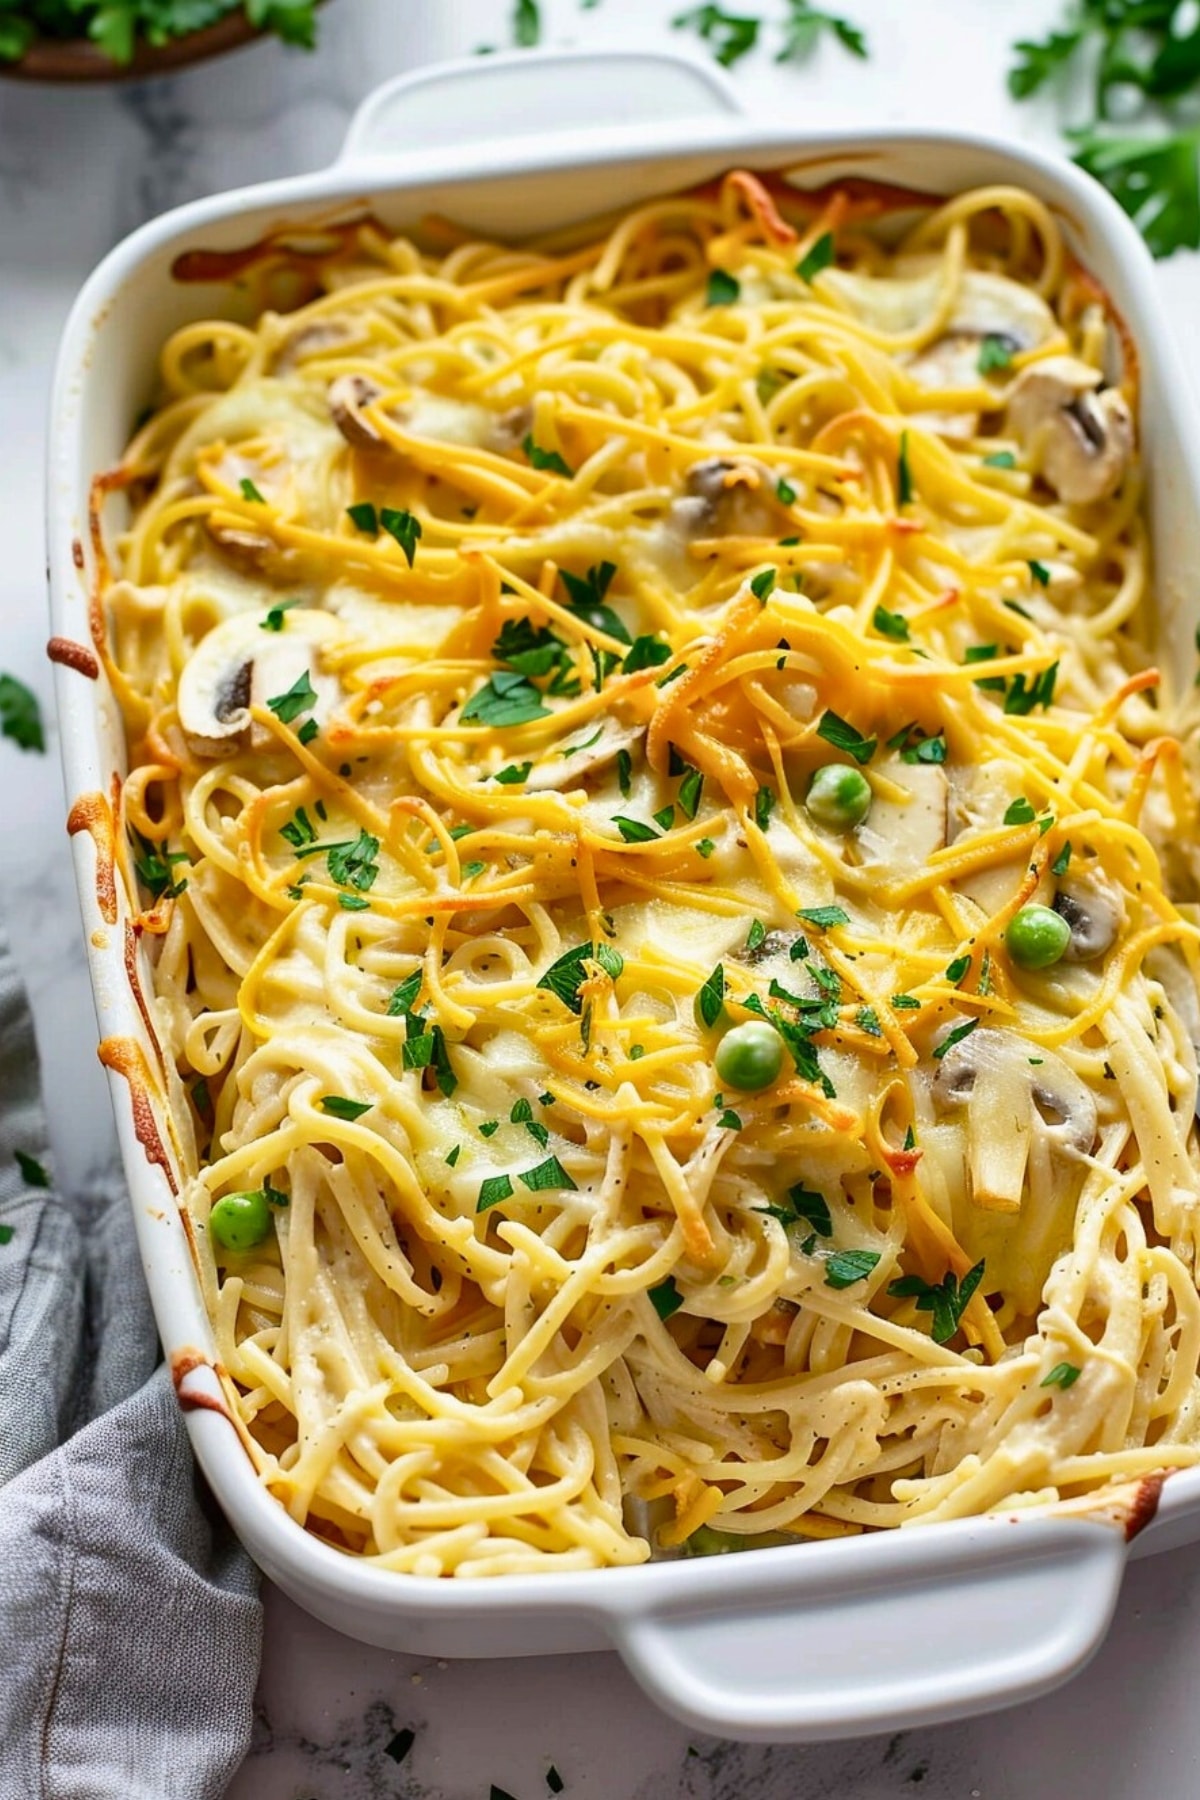 Baked chicken tetrazzini in a casserole dish garnished with chopped parsley.